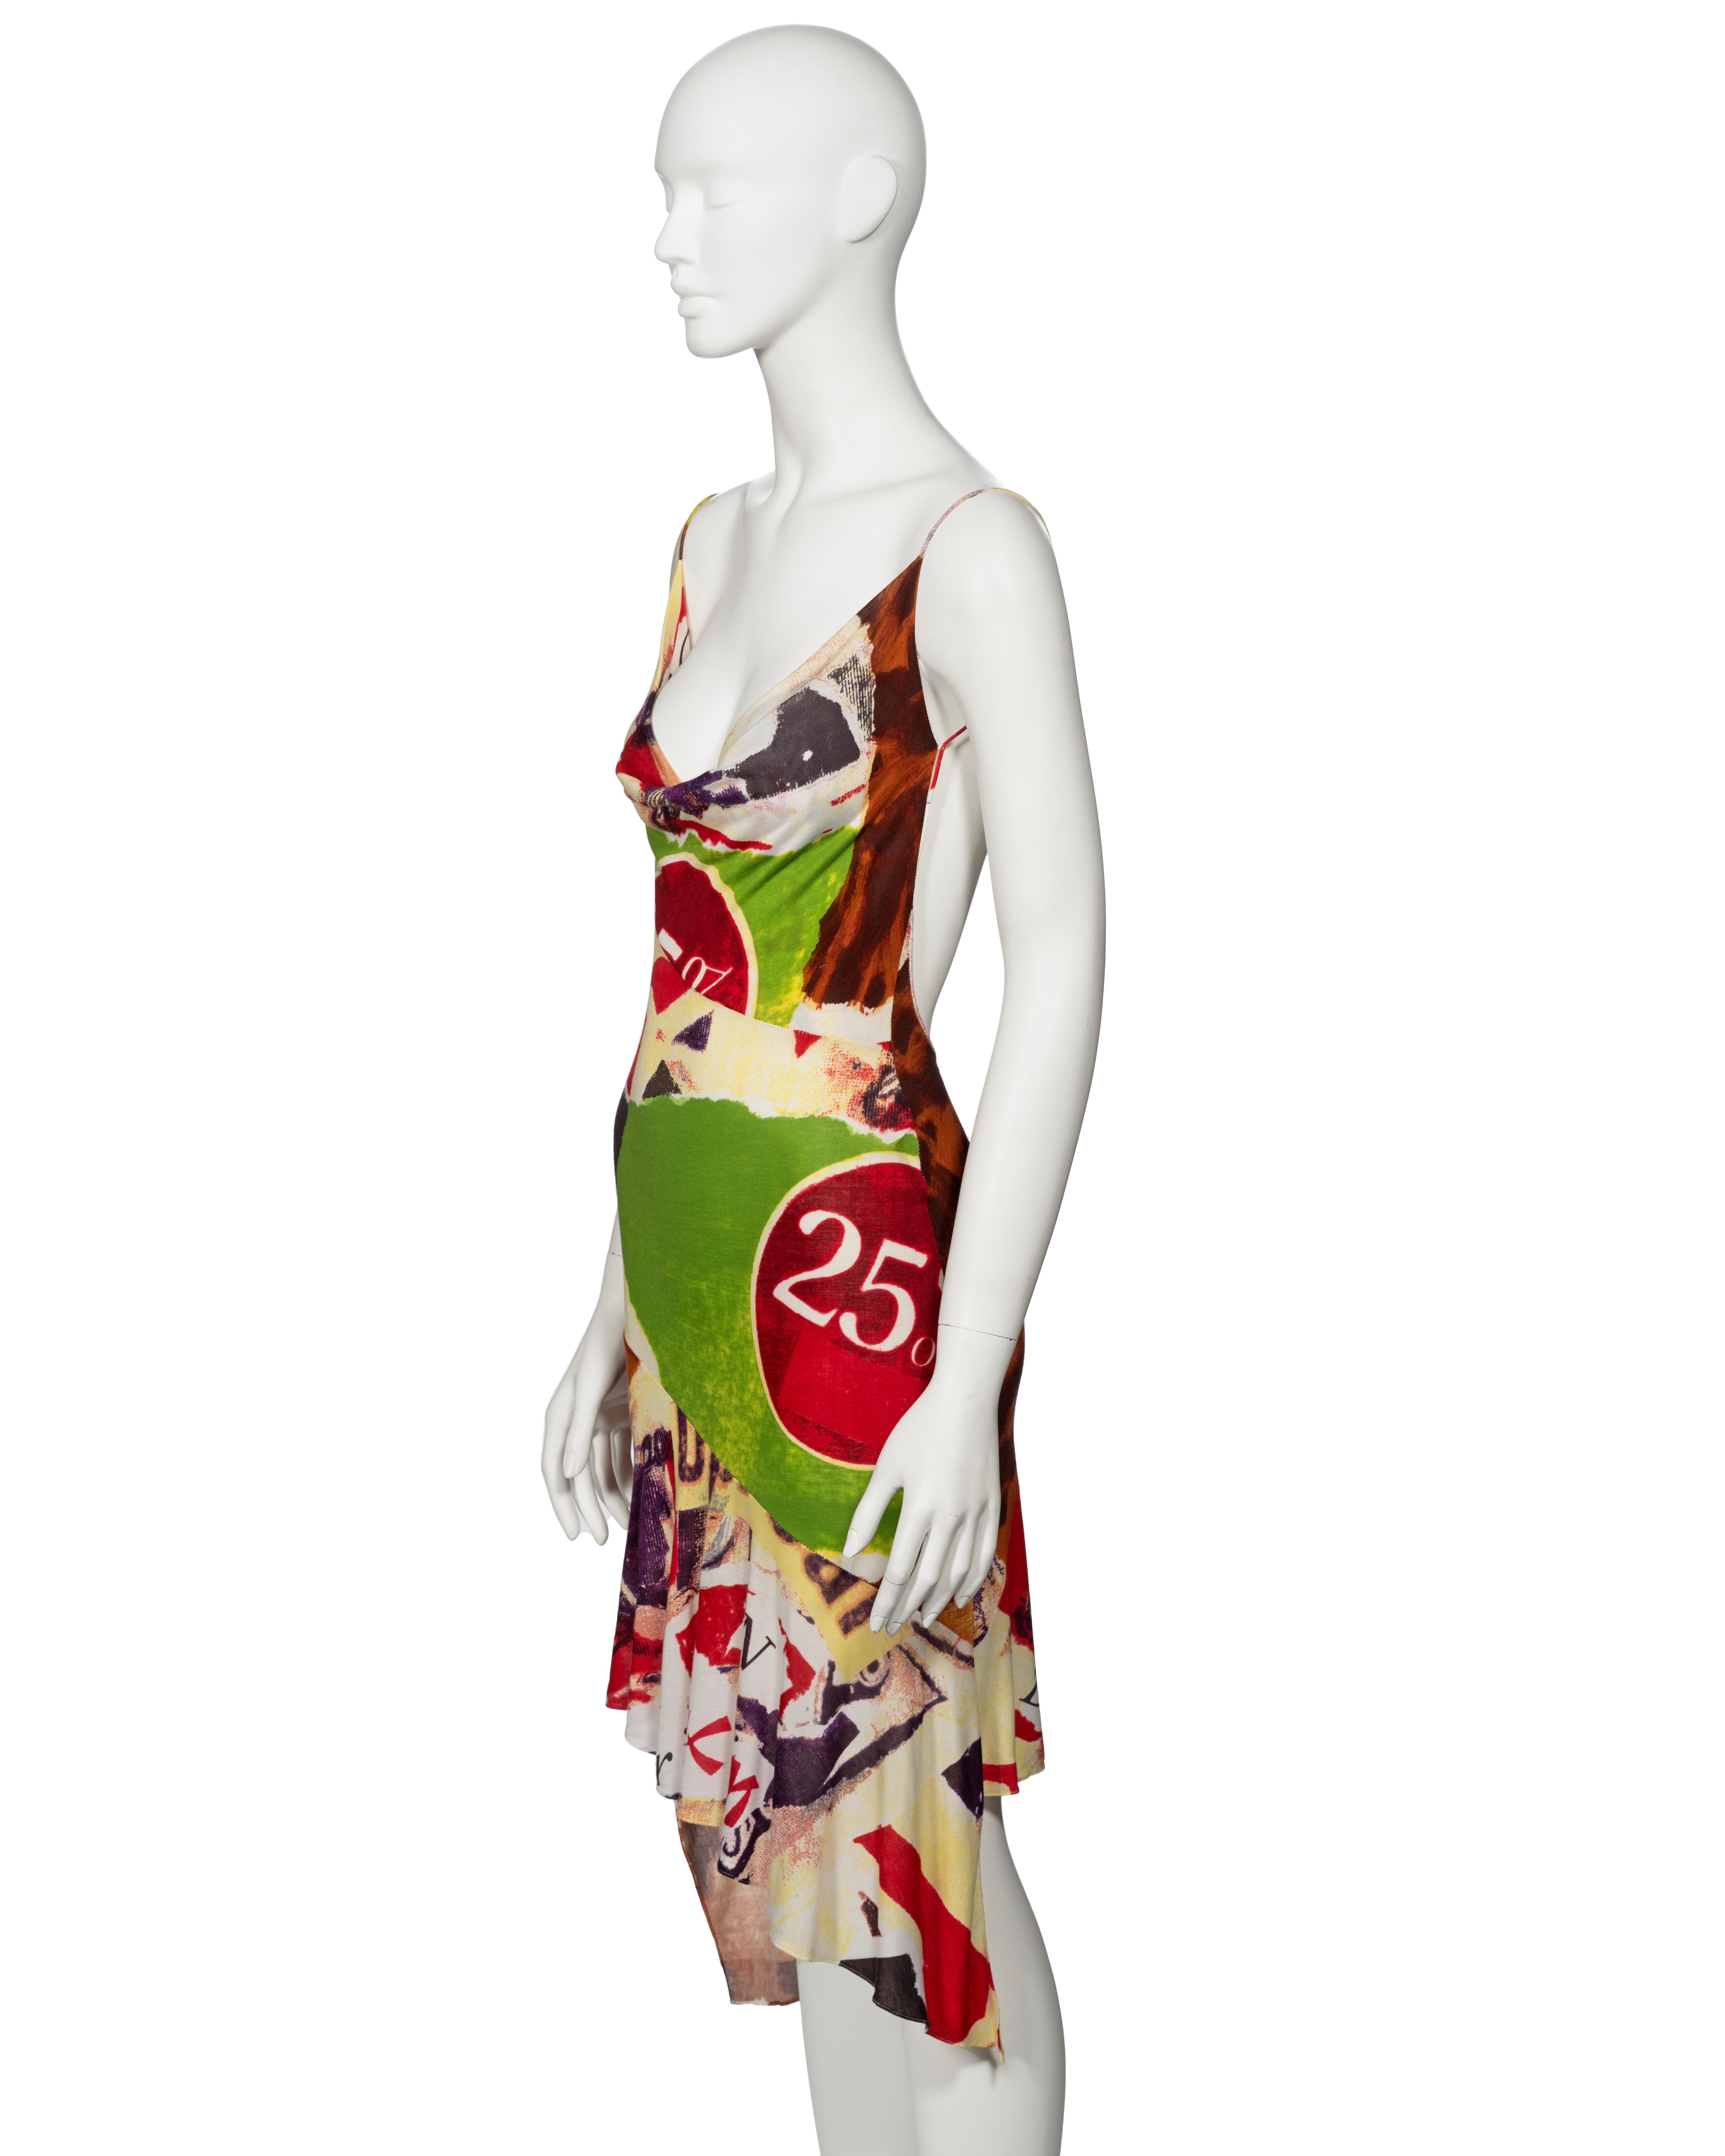 Christian Dior by John Galliano Montage Print Silk Jersey Dress, ss 2003 For Sale 5